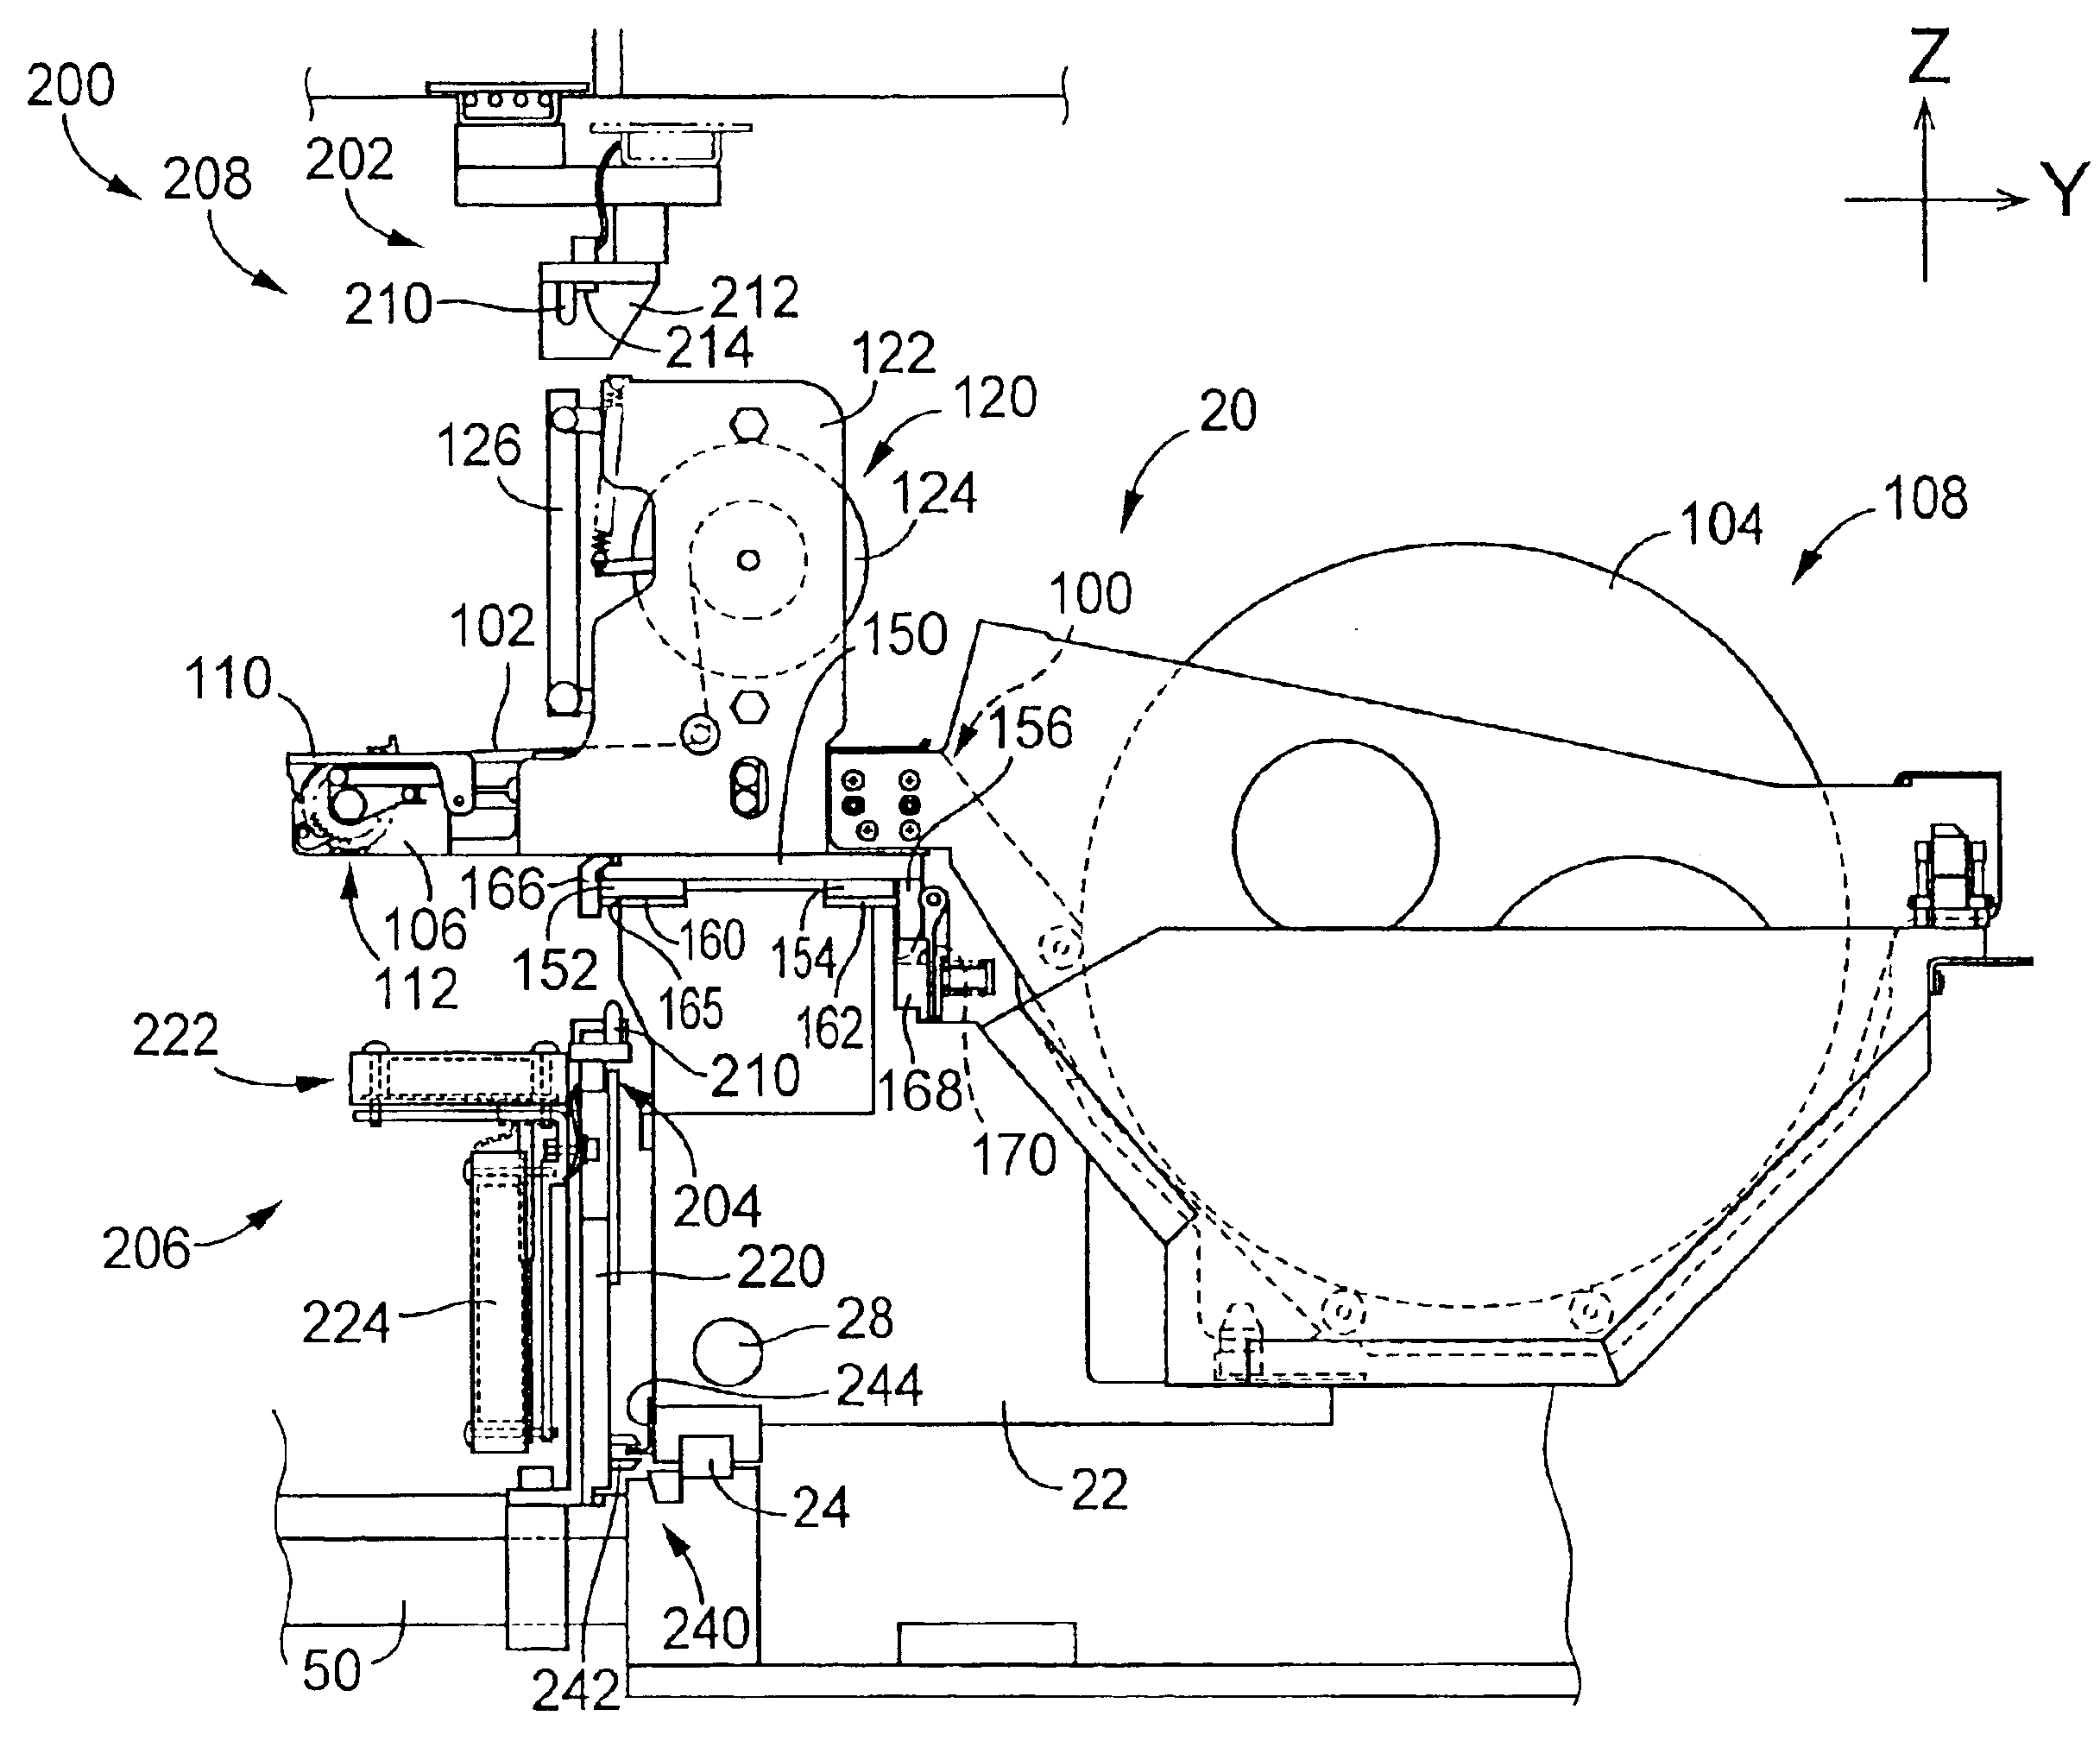 Apparatus for assisting operator in performing manual operations in connection with component feeders